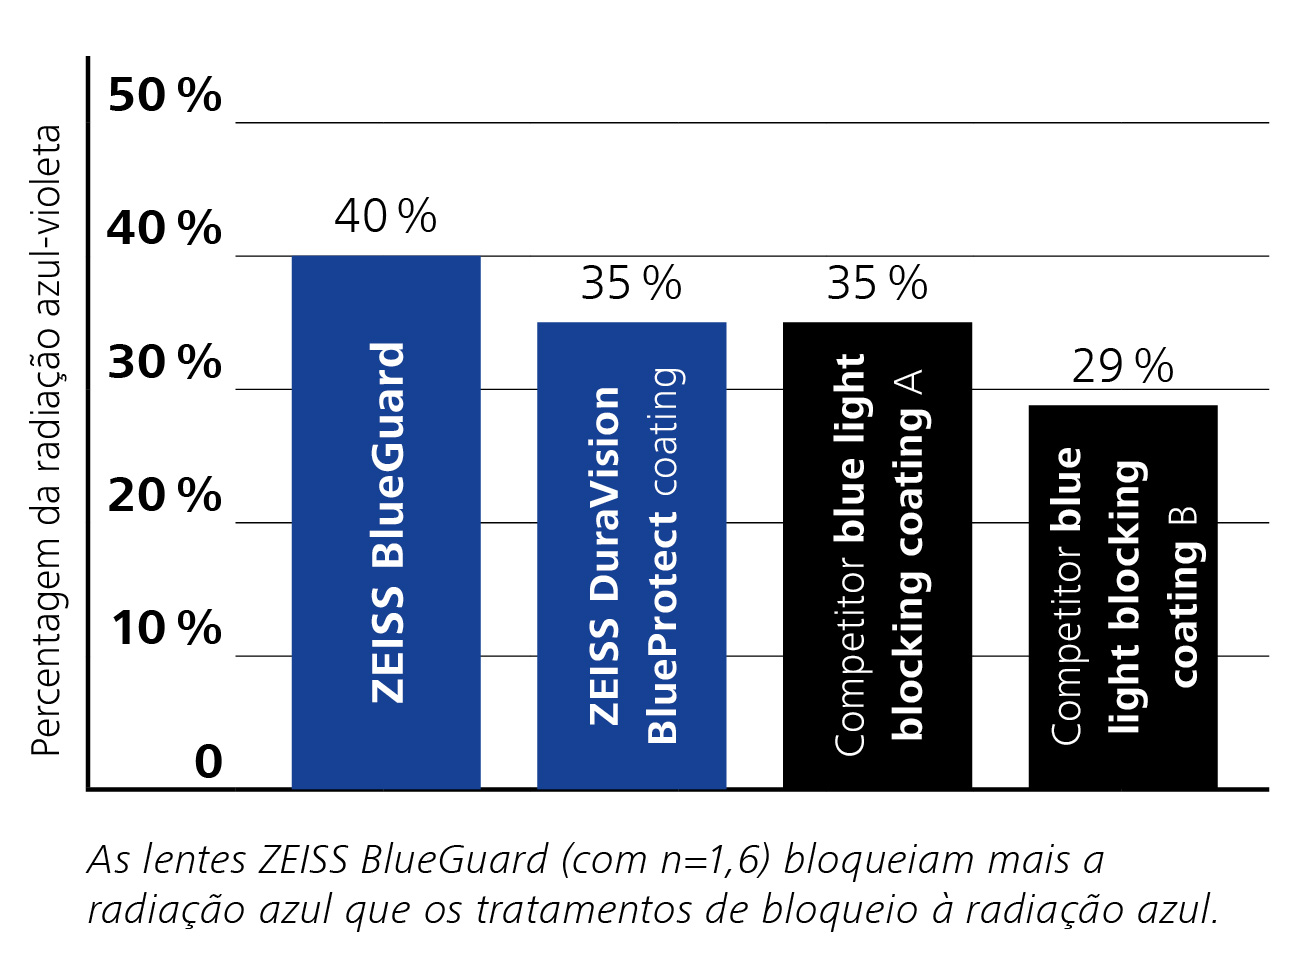 Diagram with important figures on ZEISS BlueGuard Lenses compared to similar products.